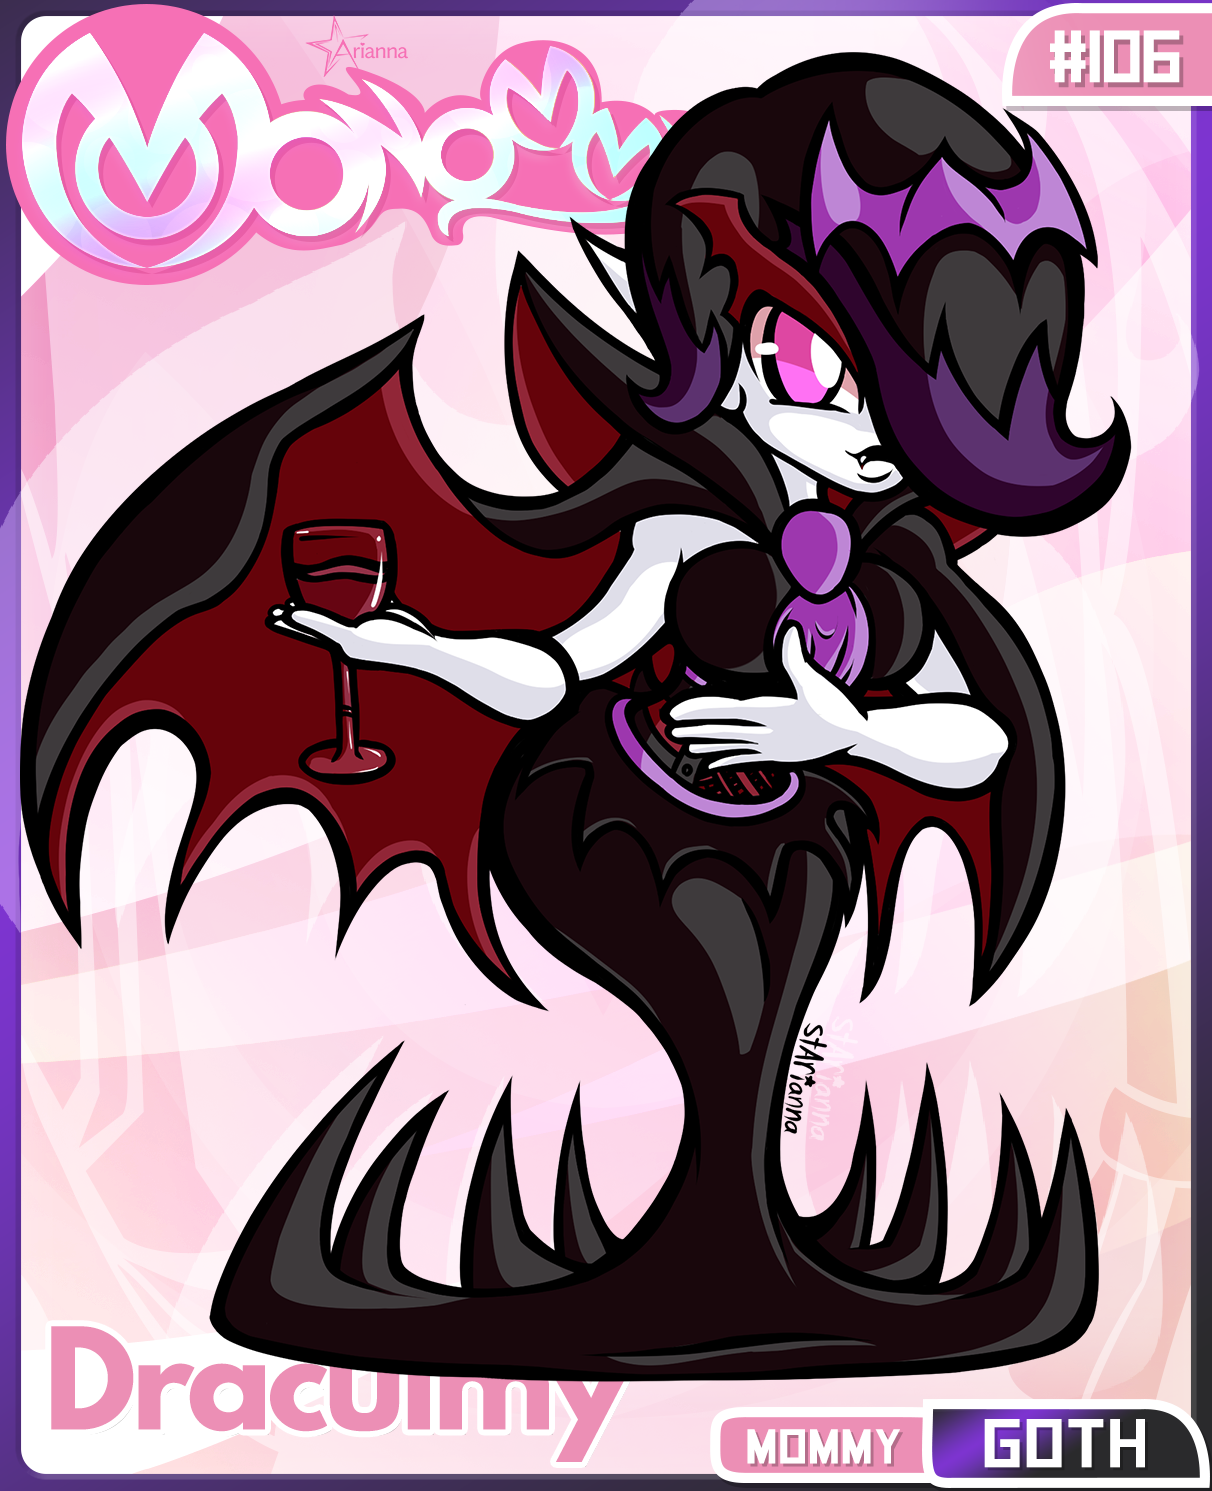 Draculmy, Monommy #106, a mommy class goth-type